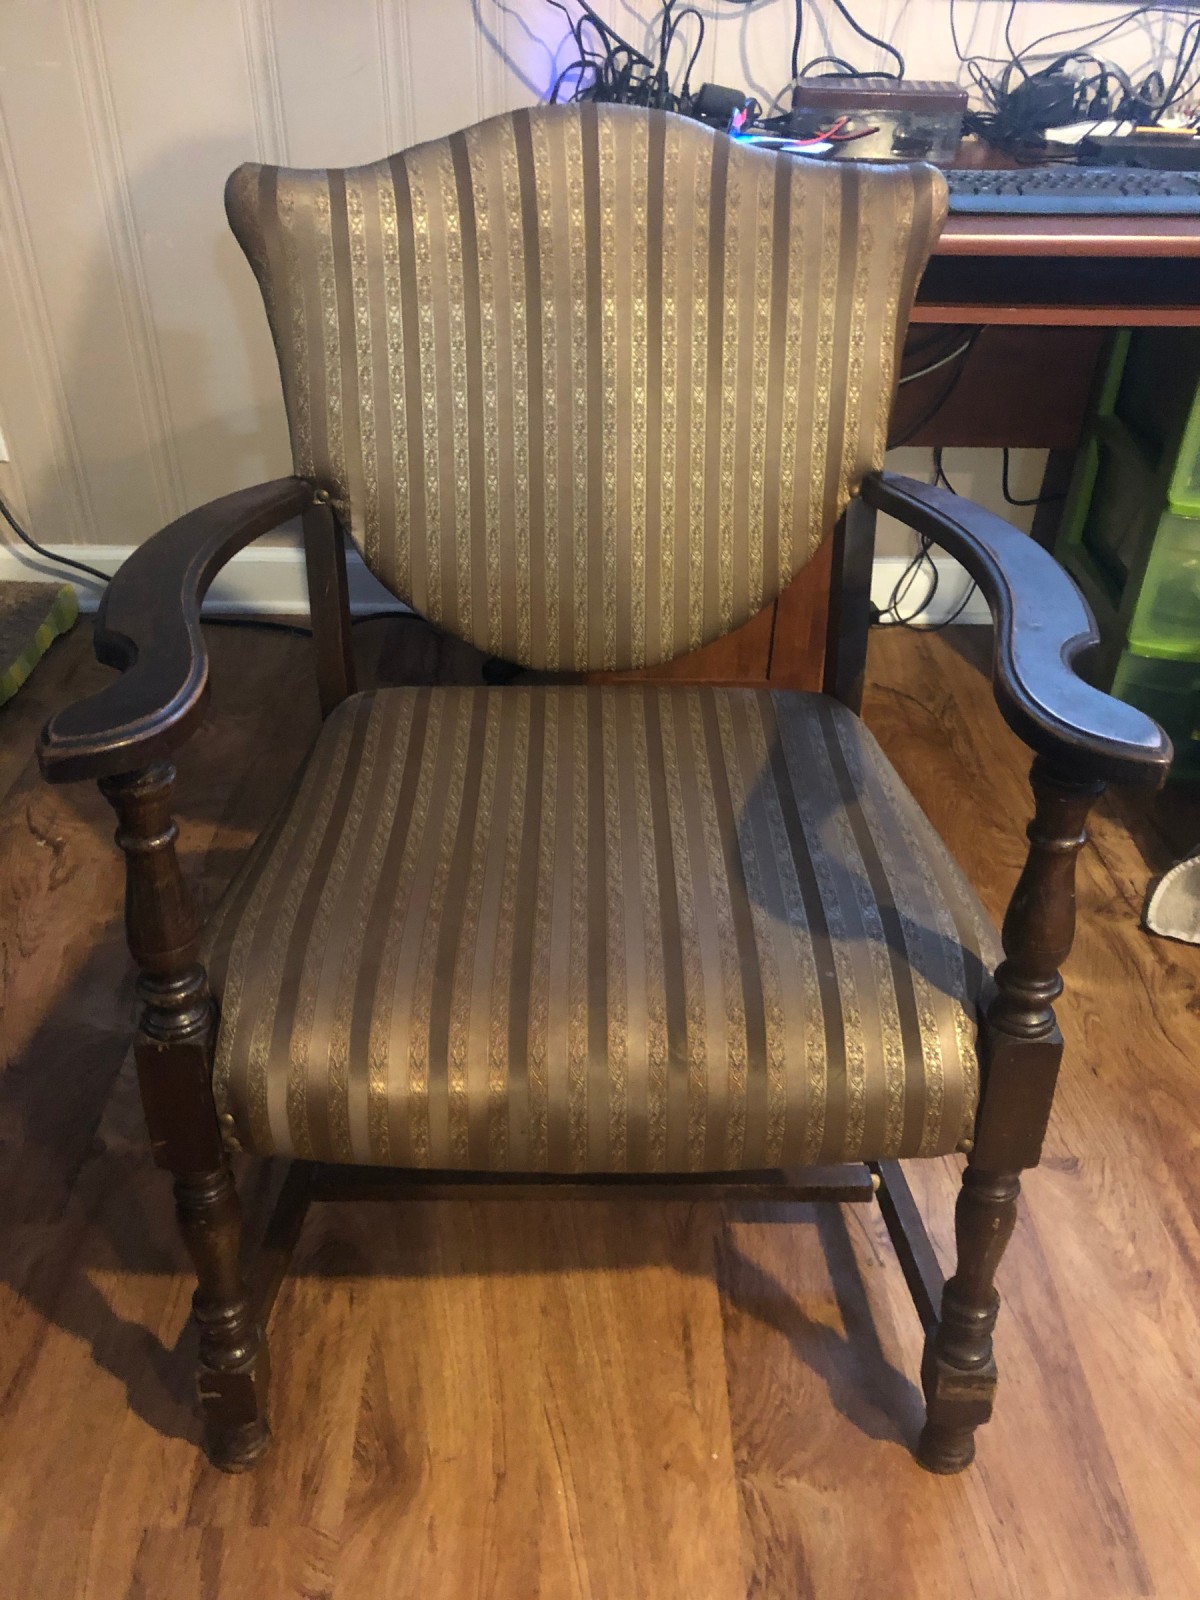 Finding The Value Of Murphy Chairs Thriftyfun